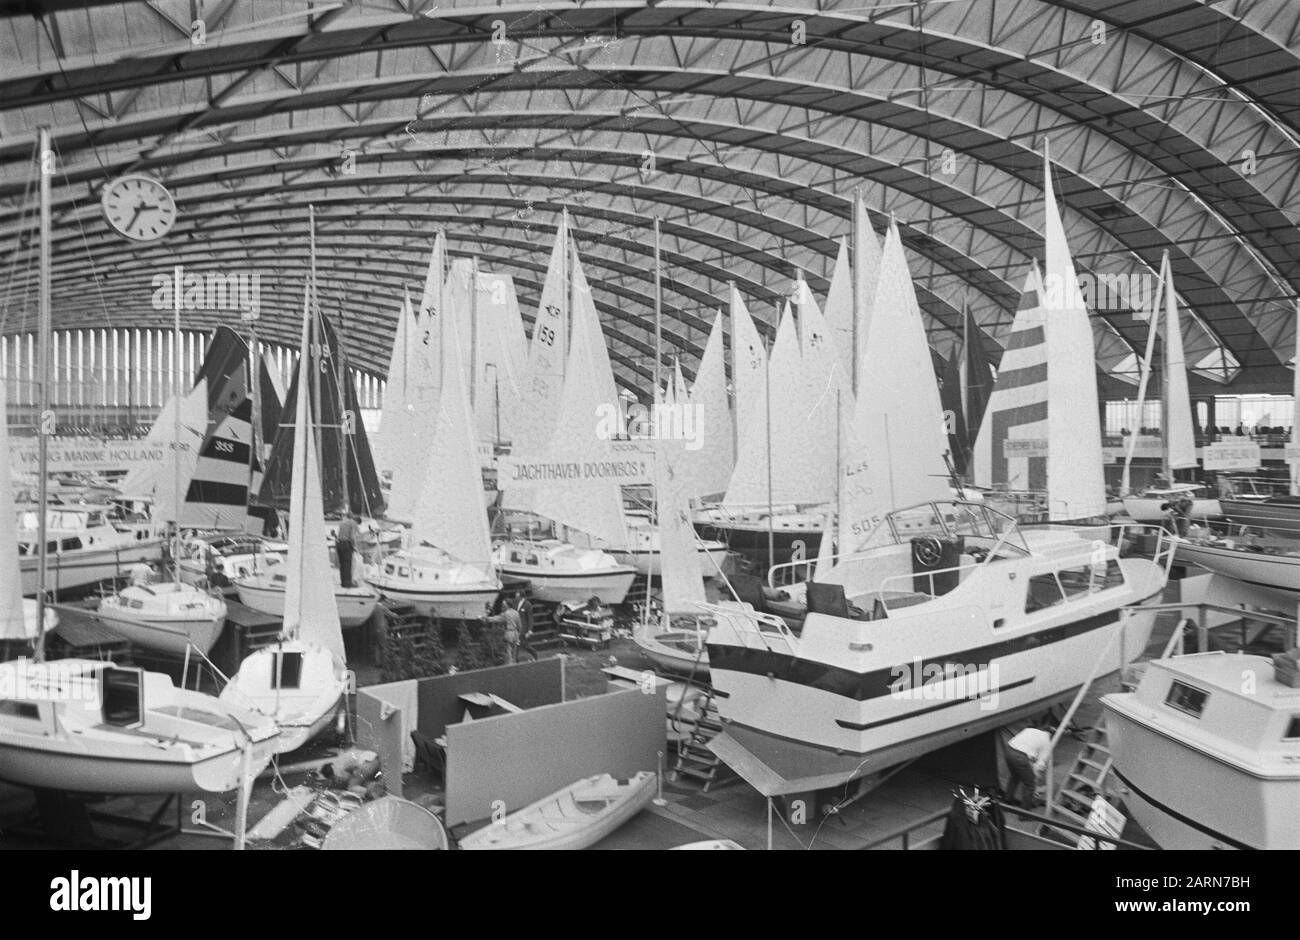 Fifteenth HISWA in RAI Amsterdam. Preparations. Boat with parachute Date: March 12, 1970 Location: Amsterdam, Noord-Holland Keywords: Preparations, fairs, boats Institution name: HISWA Stock Photo